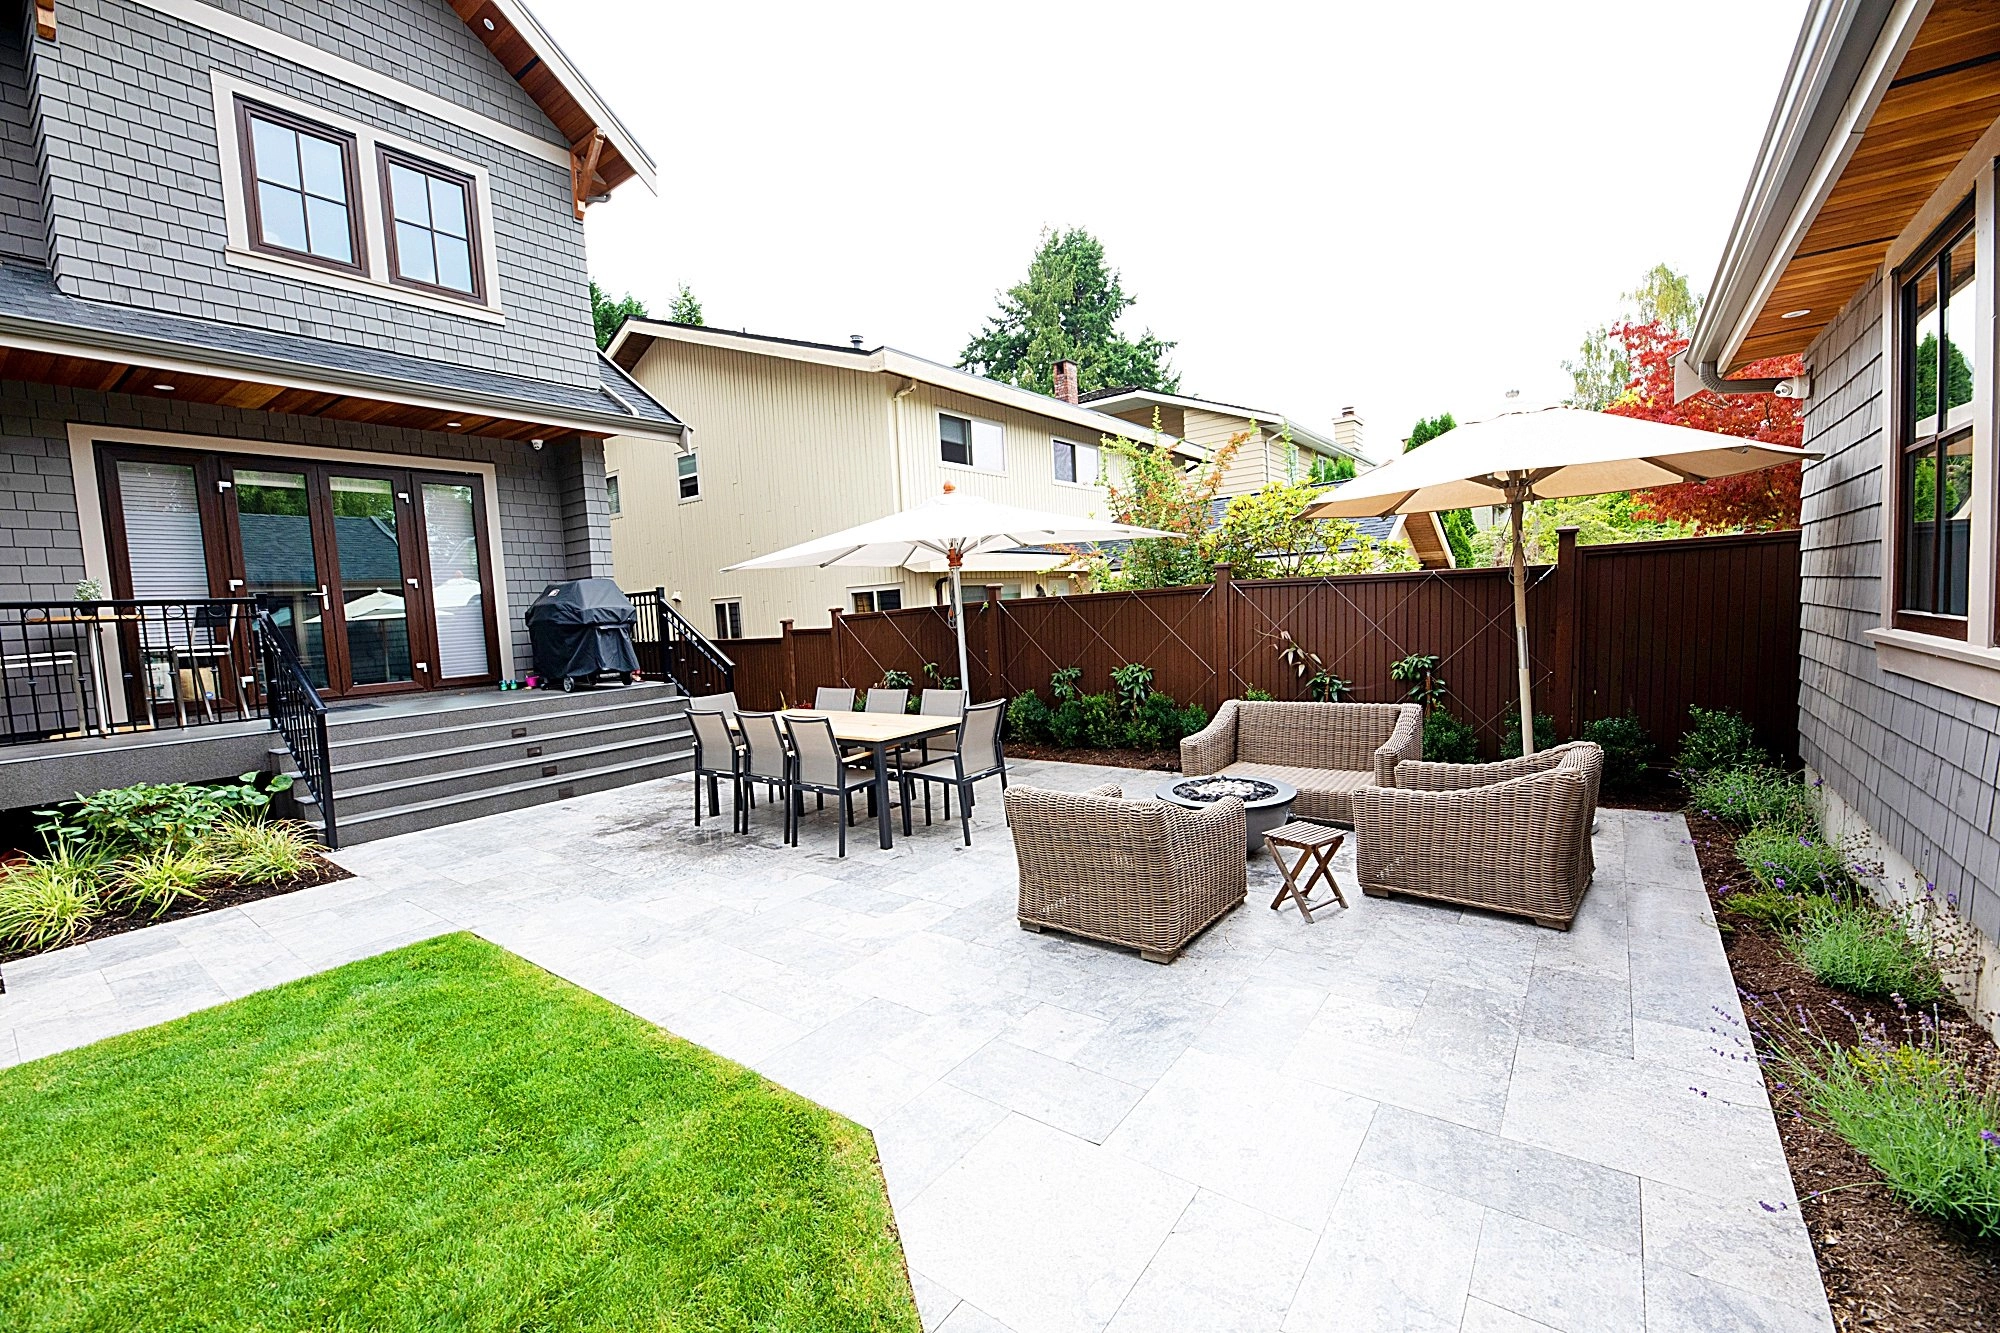 A picture of a backyard deck with numerous tables and chairs as well as lounge umbrellas.